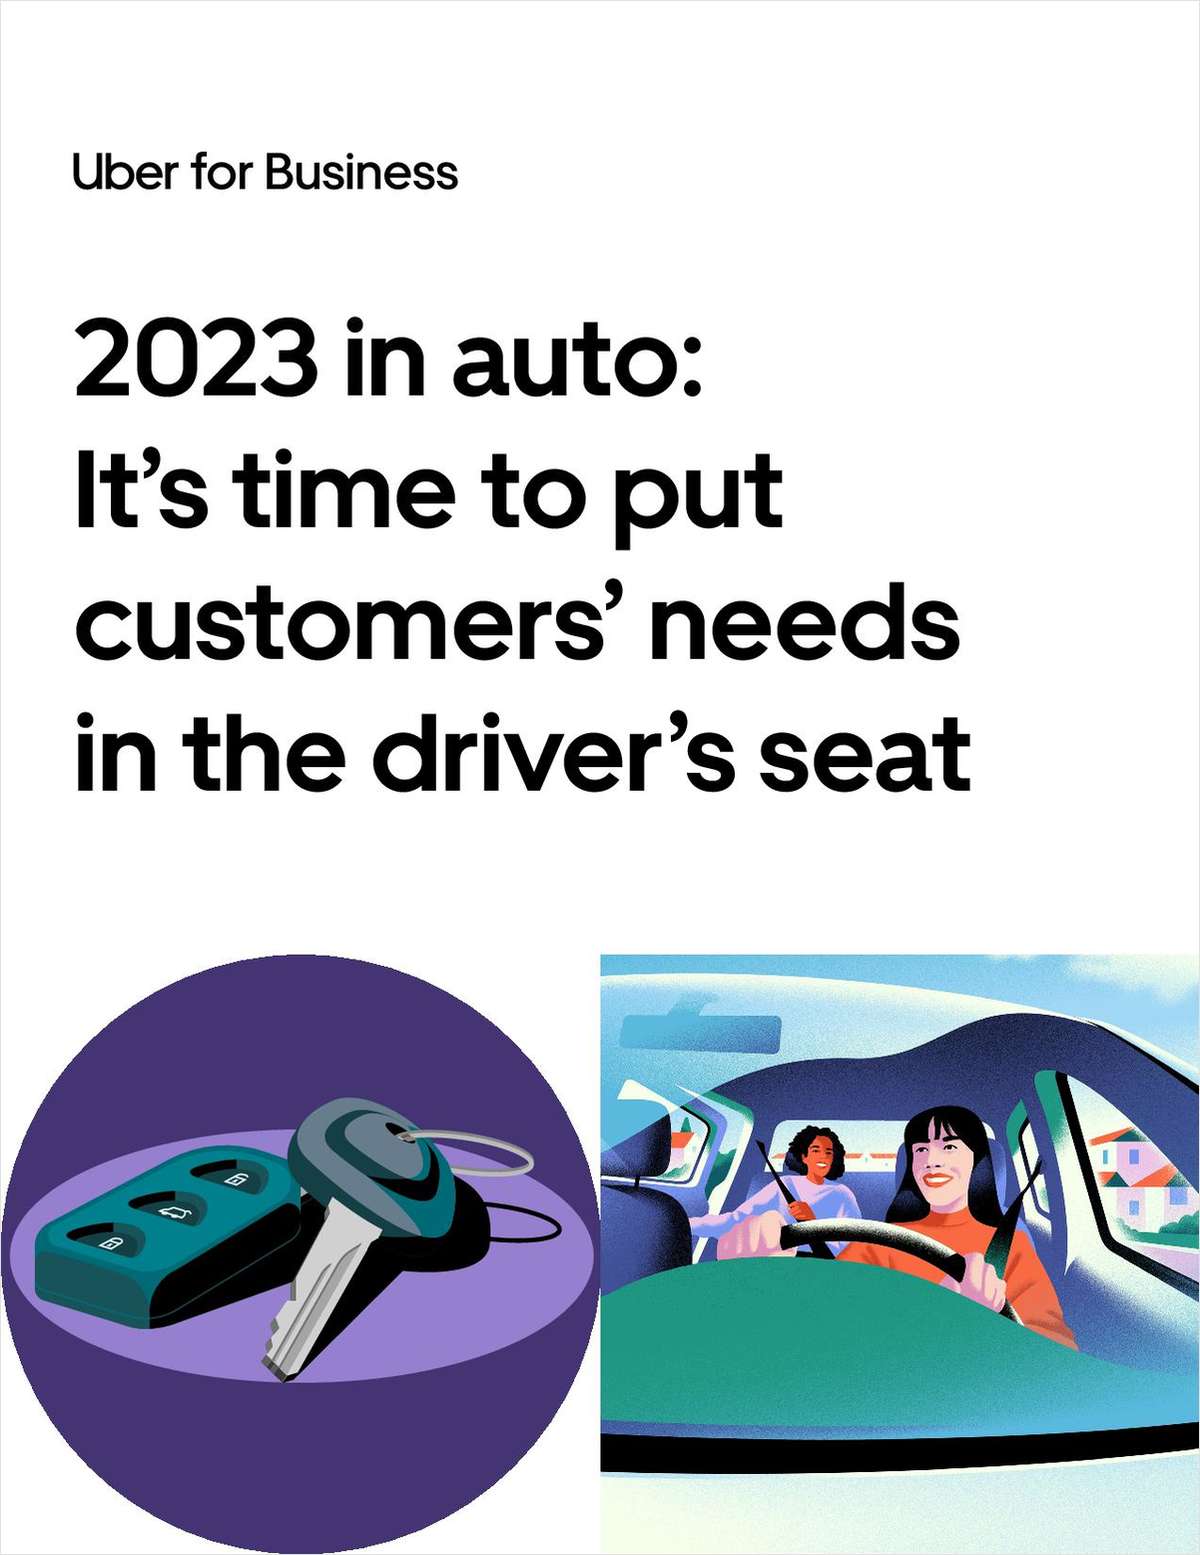 2023 in auto: it's time to put customers' needs in the driver's seat